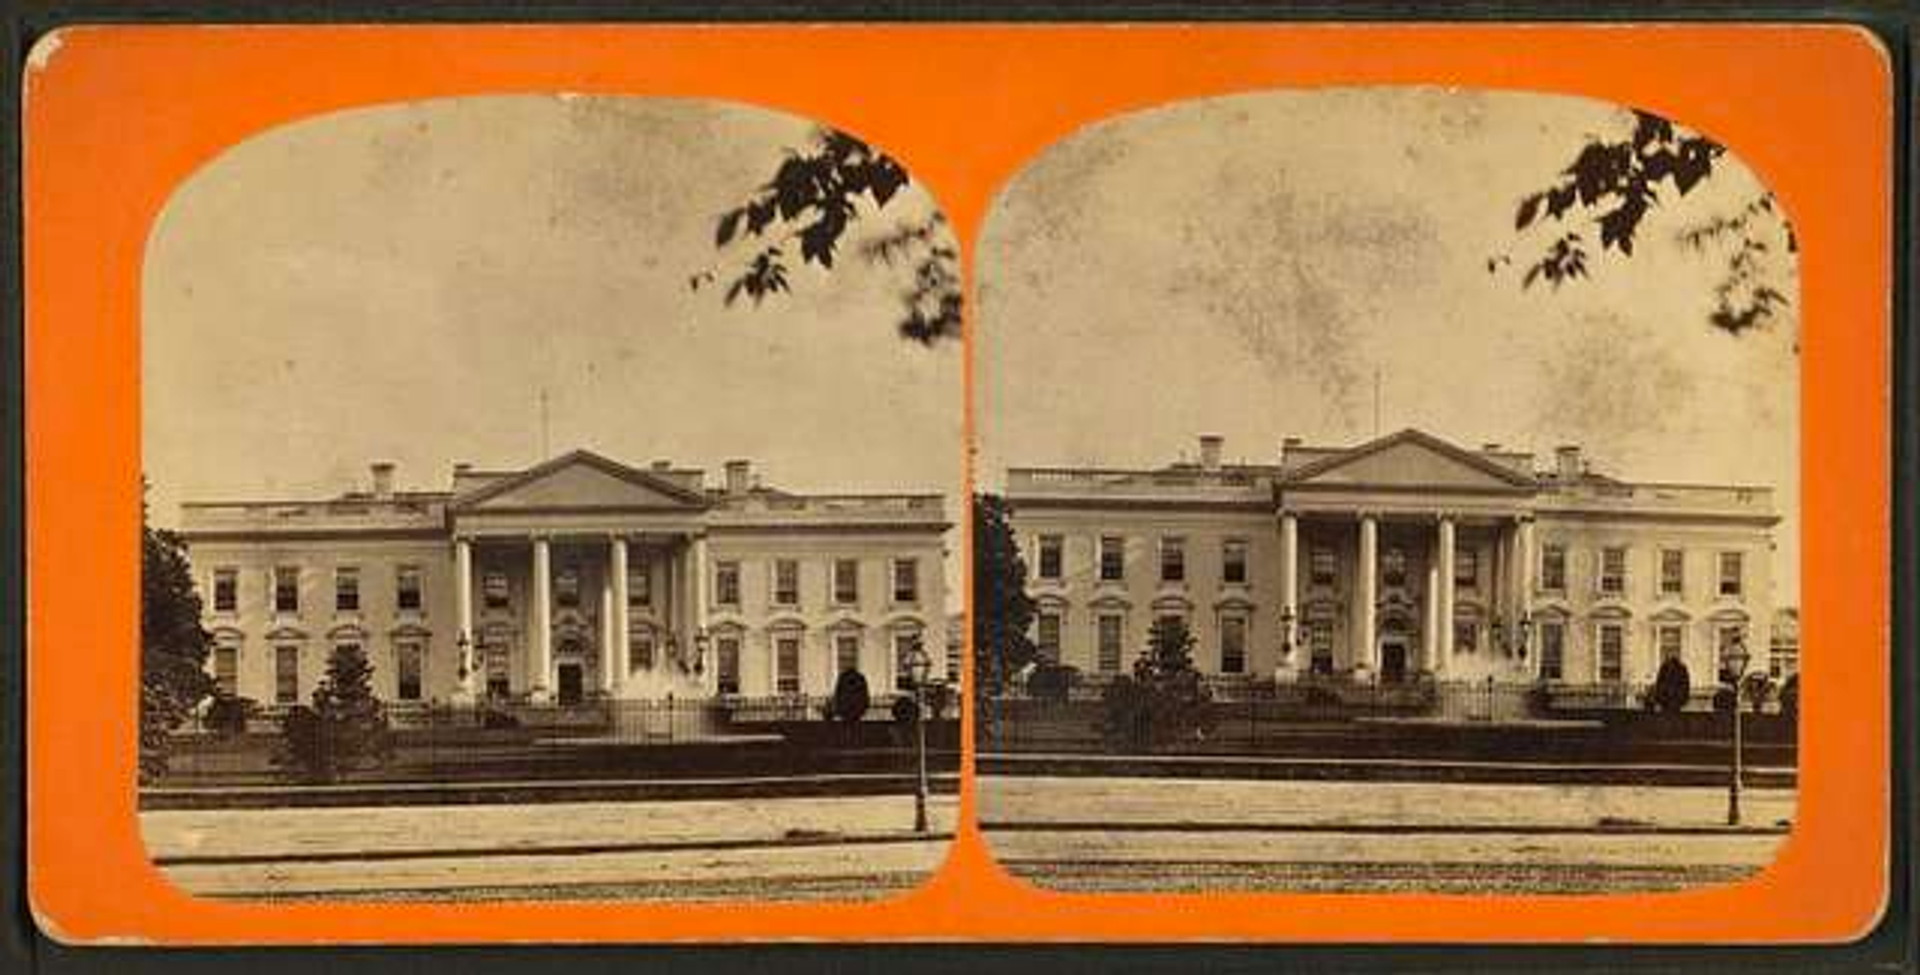 A 19th century double-image of the front of the White House, sepia against an orange background. 